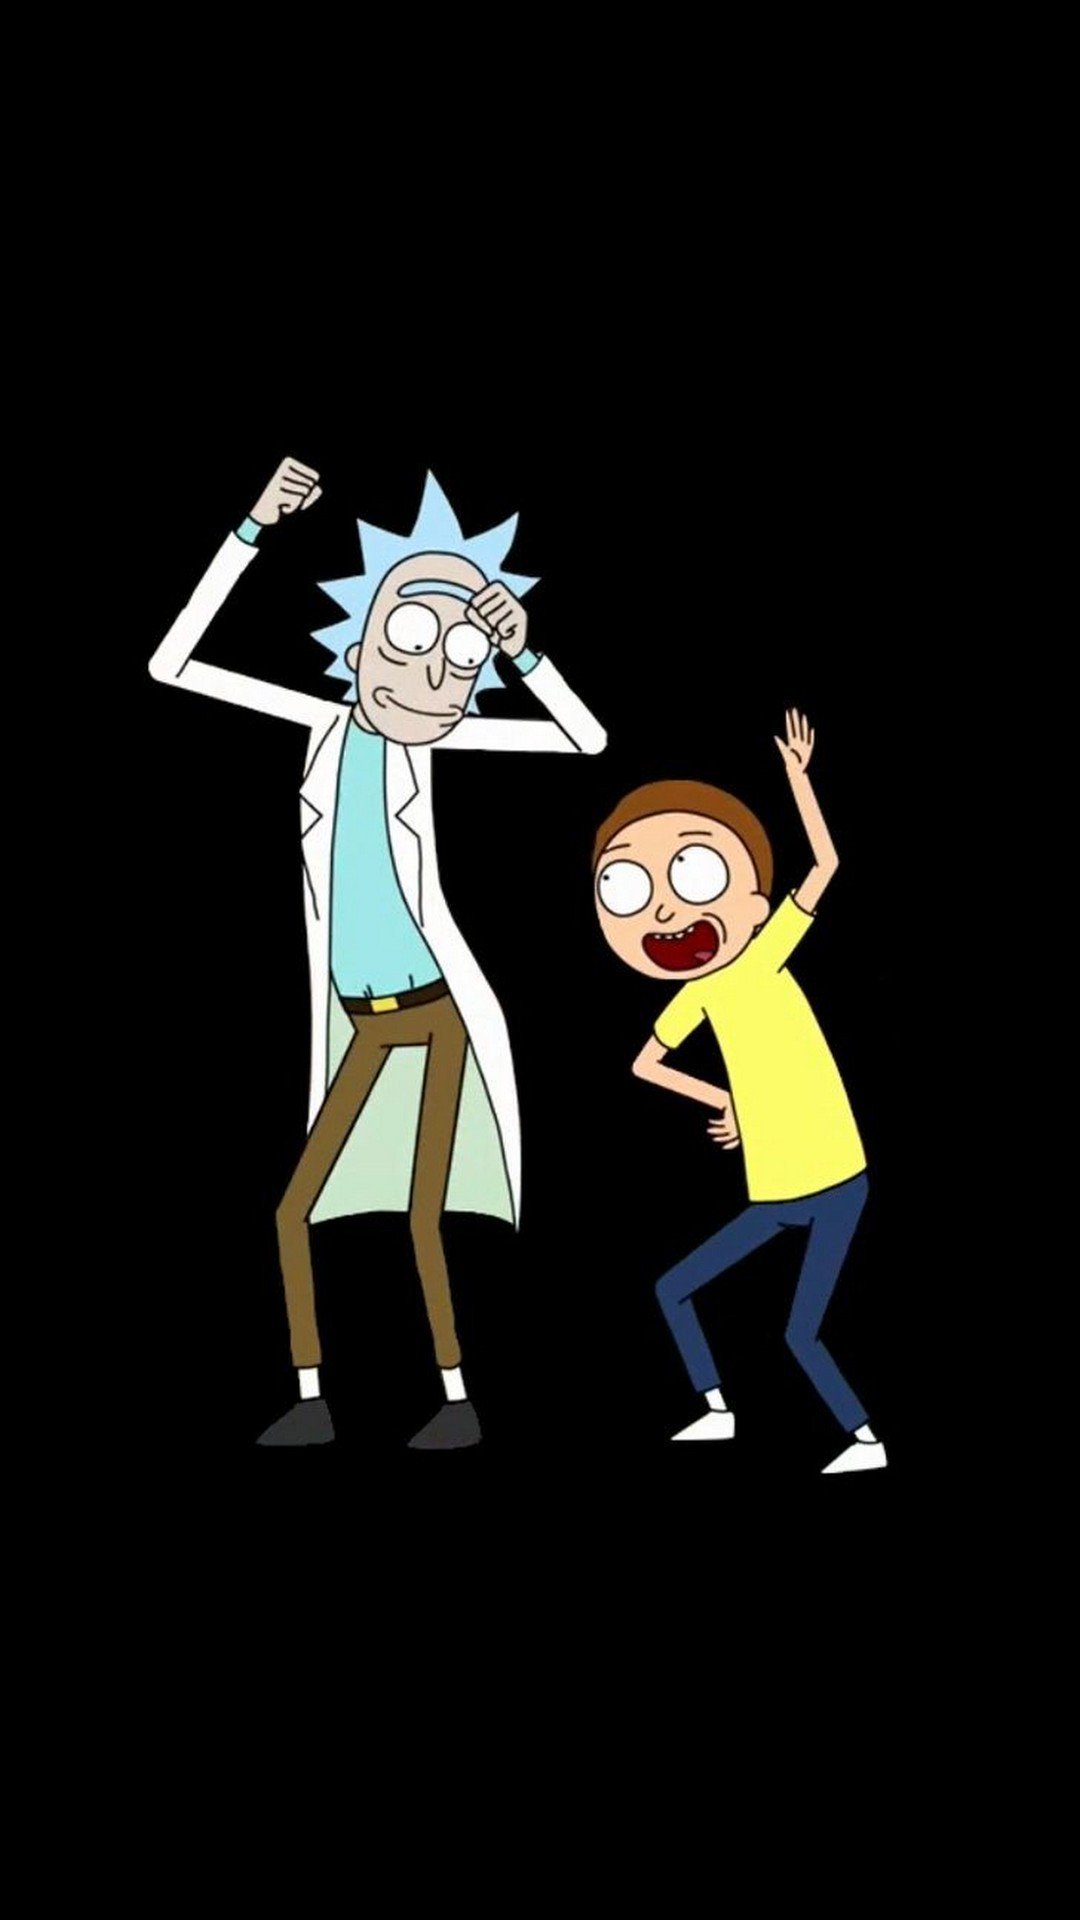 Wallpaper Cute On Rick And Morty iPhone